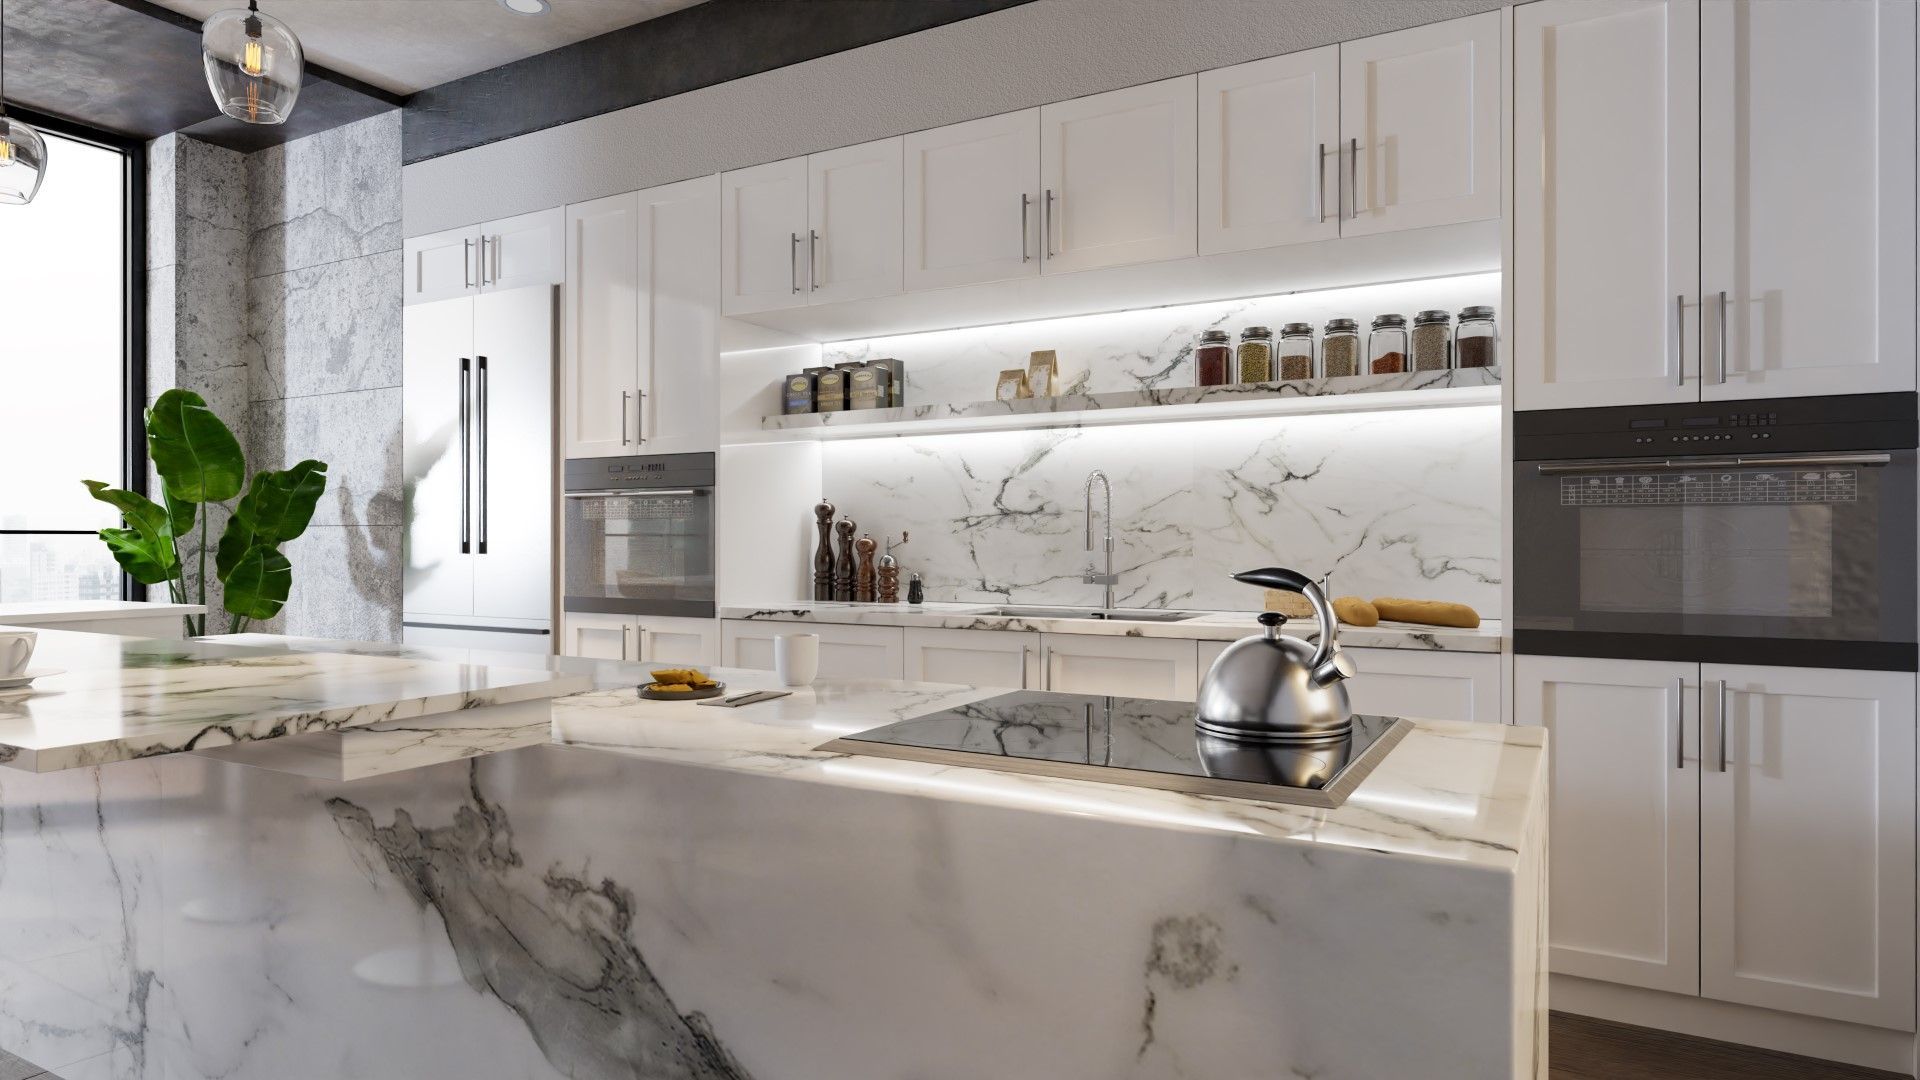 An image of Kitchen Remodeling Services in Fremont, CA